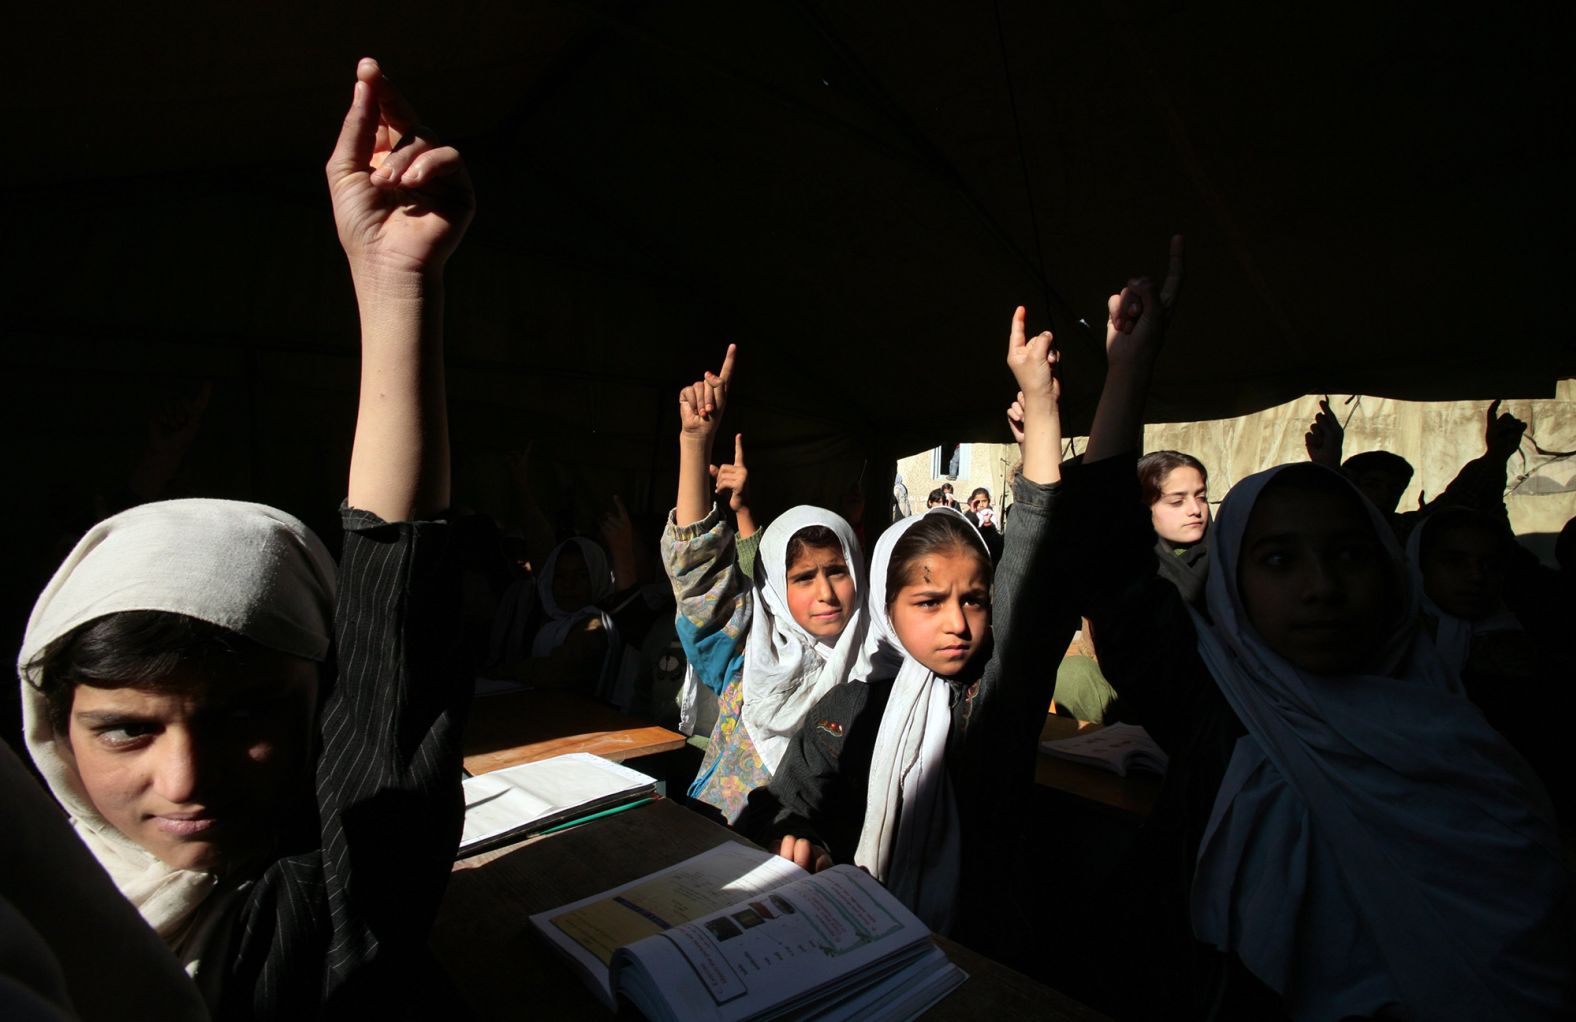 Girls at the Bibi Mahroo High School raise their hands during an English class in Kabul in November 2006. After the fall of the Taliban, millions of Afghan girls <a href="https://www.cnn.com/2012/09/26/world/asia/cnnheroes-afghan-schoolgirls" target="_blank">were able to attend school</a> and get the education that their mothers couldn't.